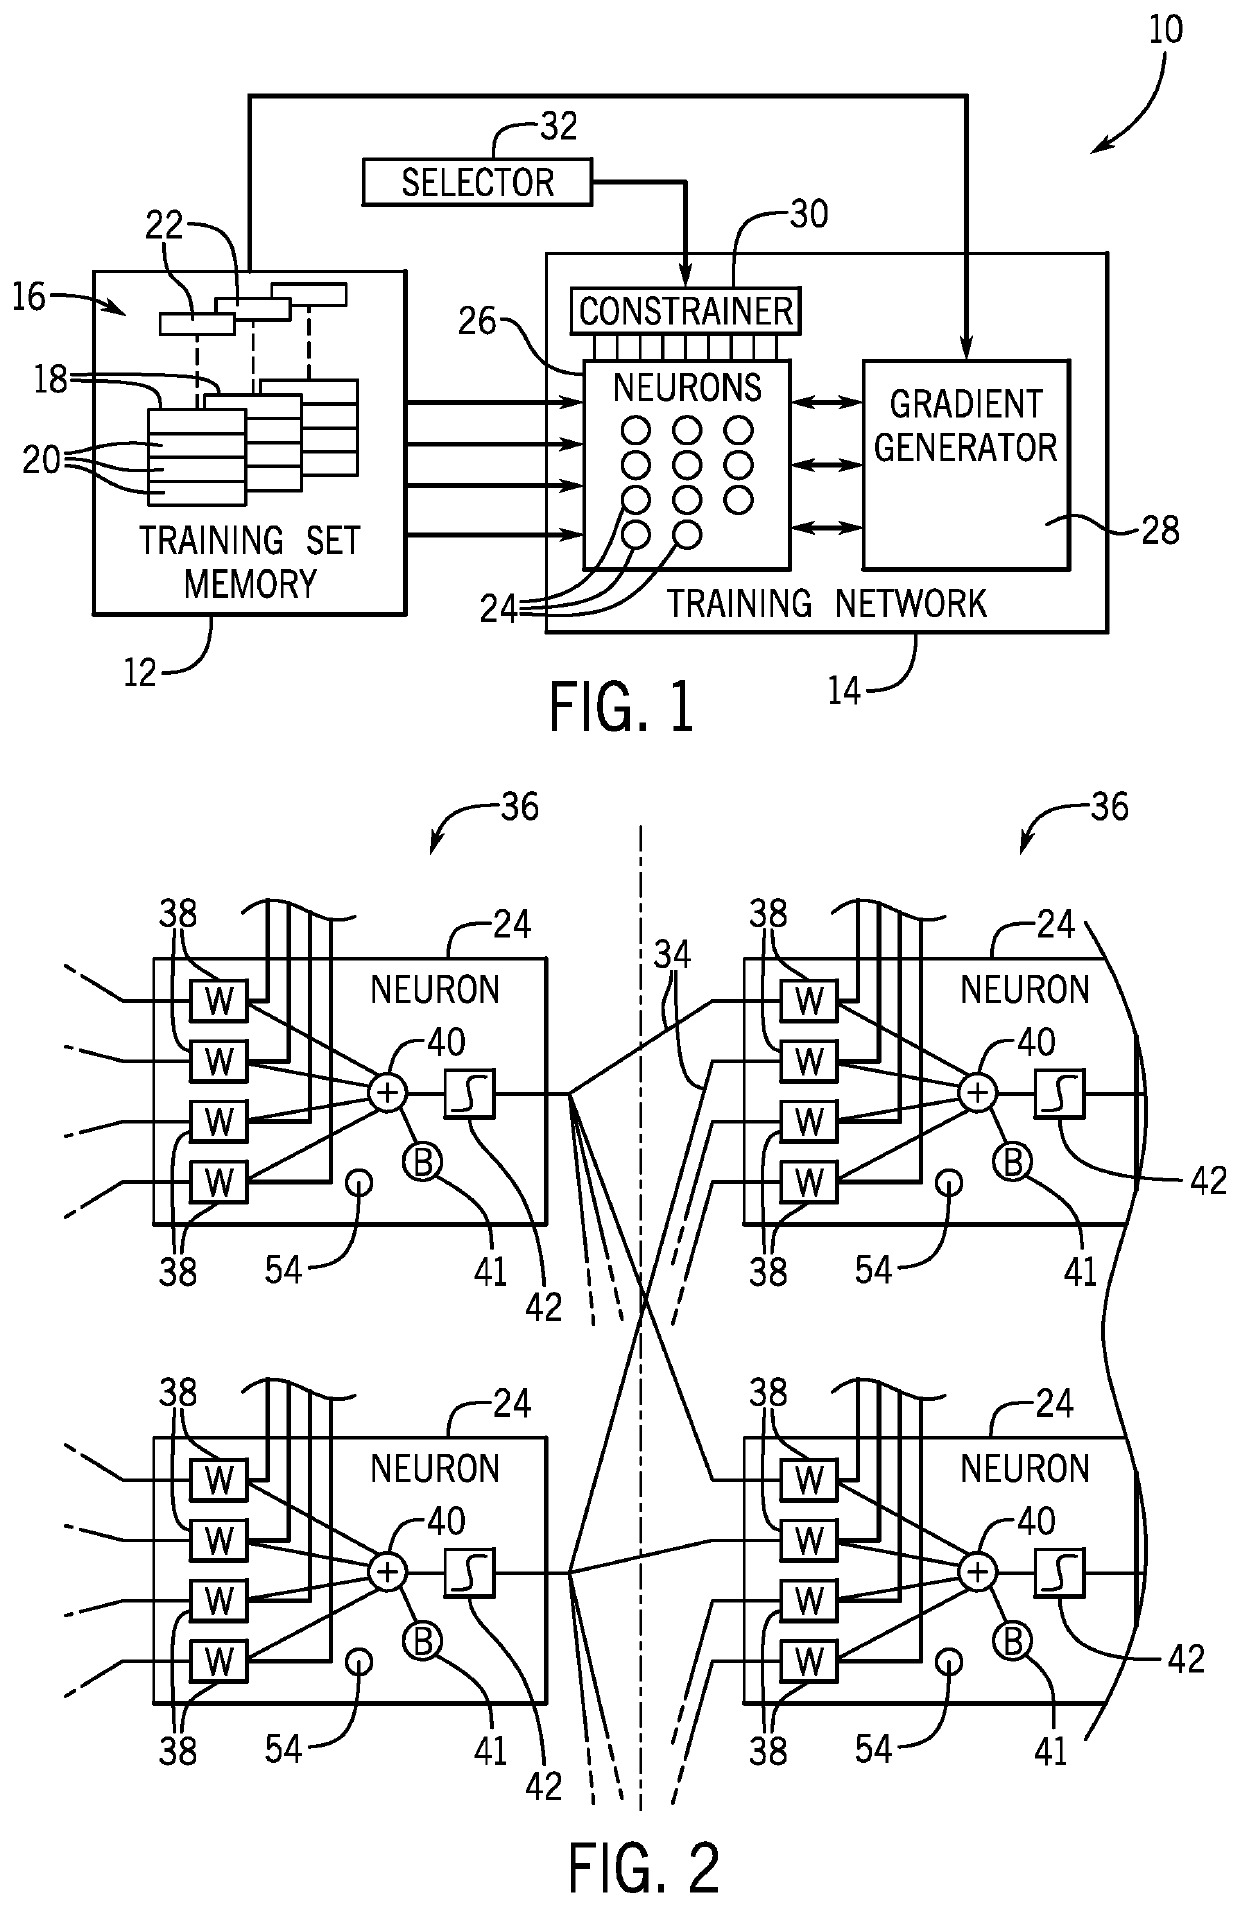 Training System for Artificial Neural Networks Having a Global Weight Constrainer